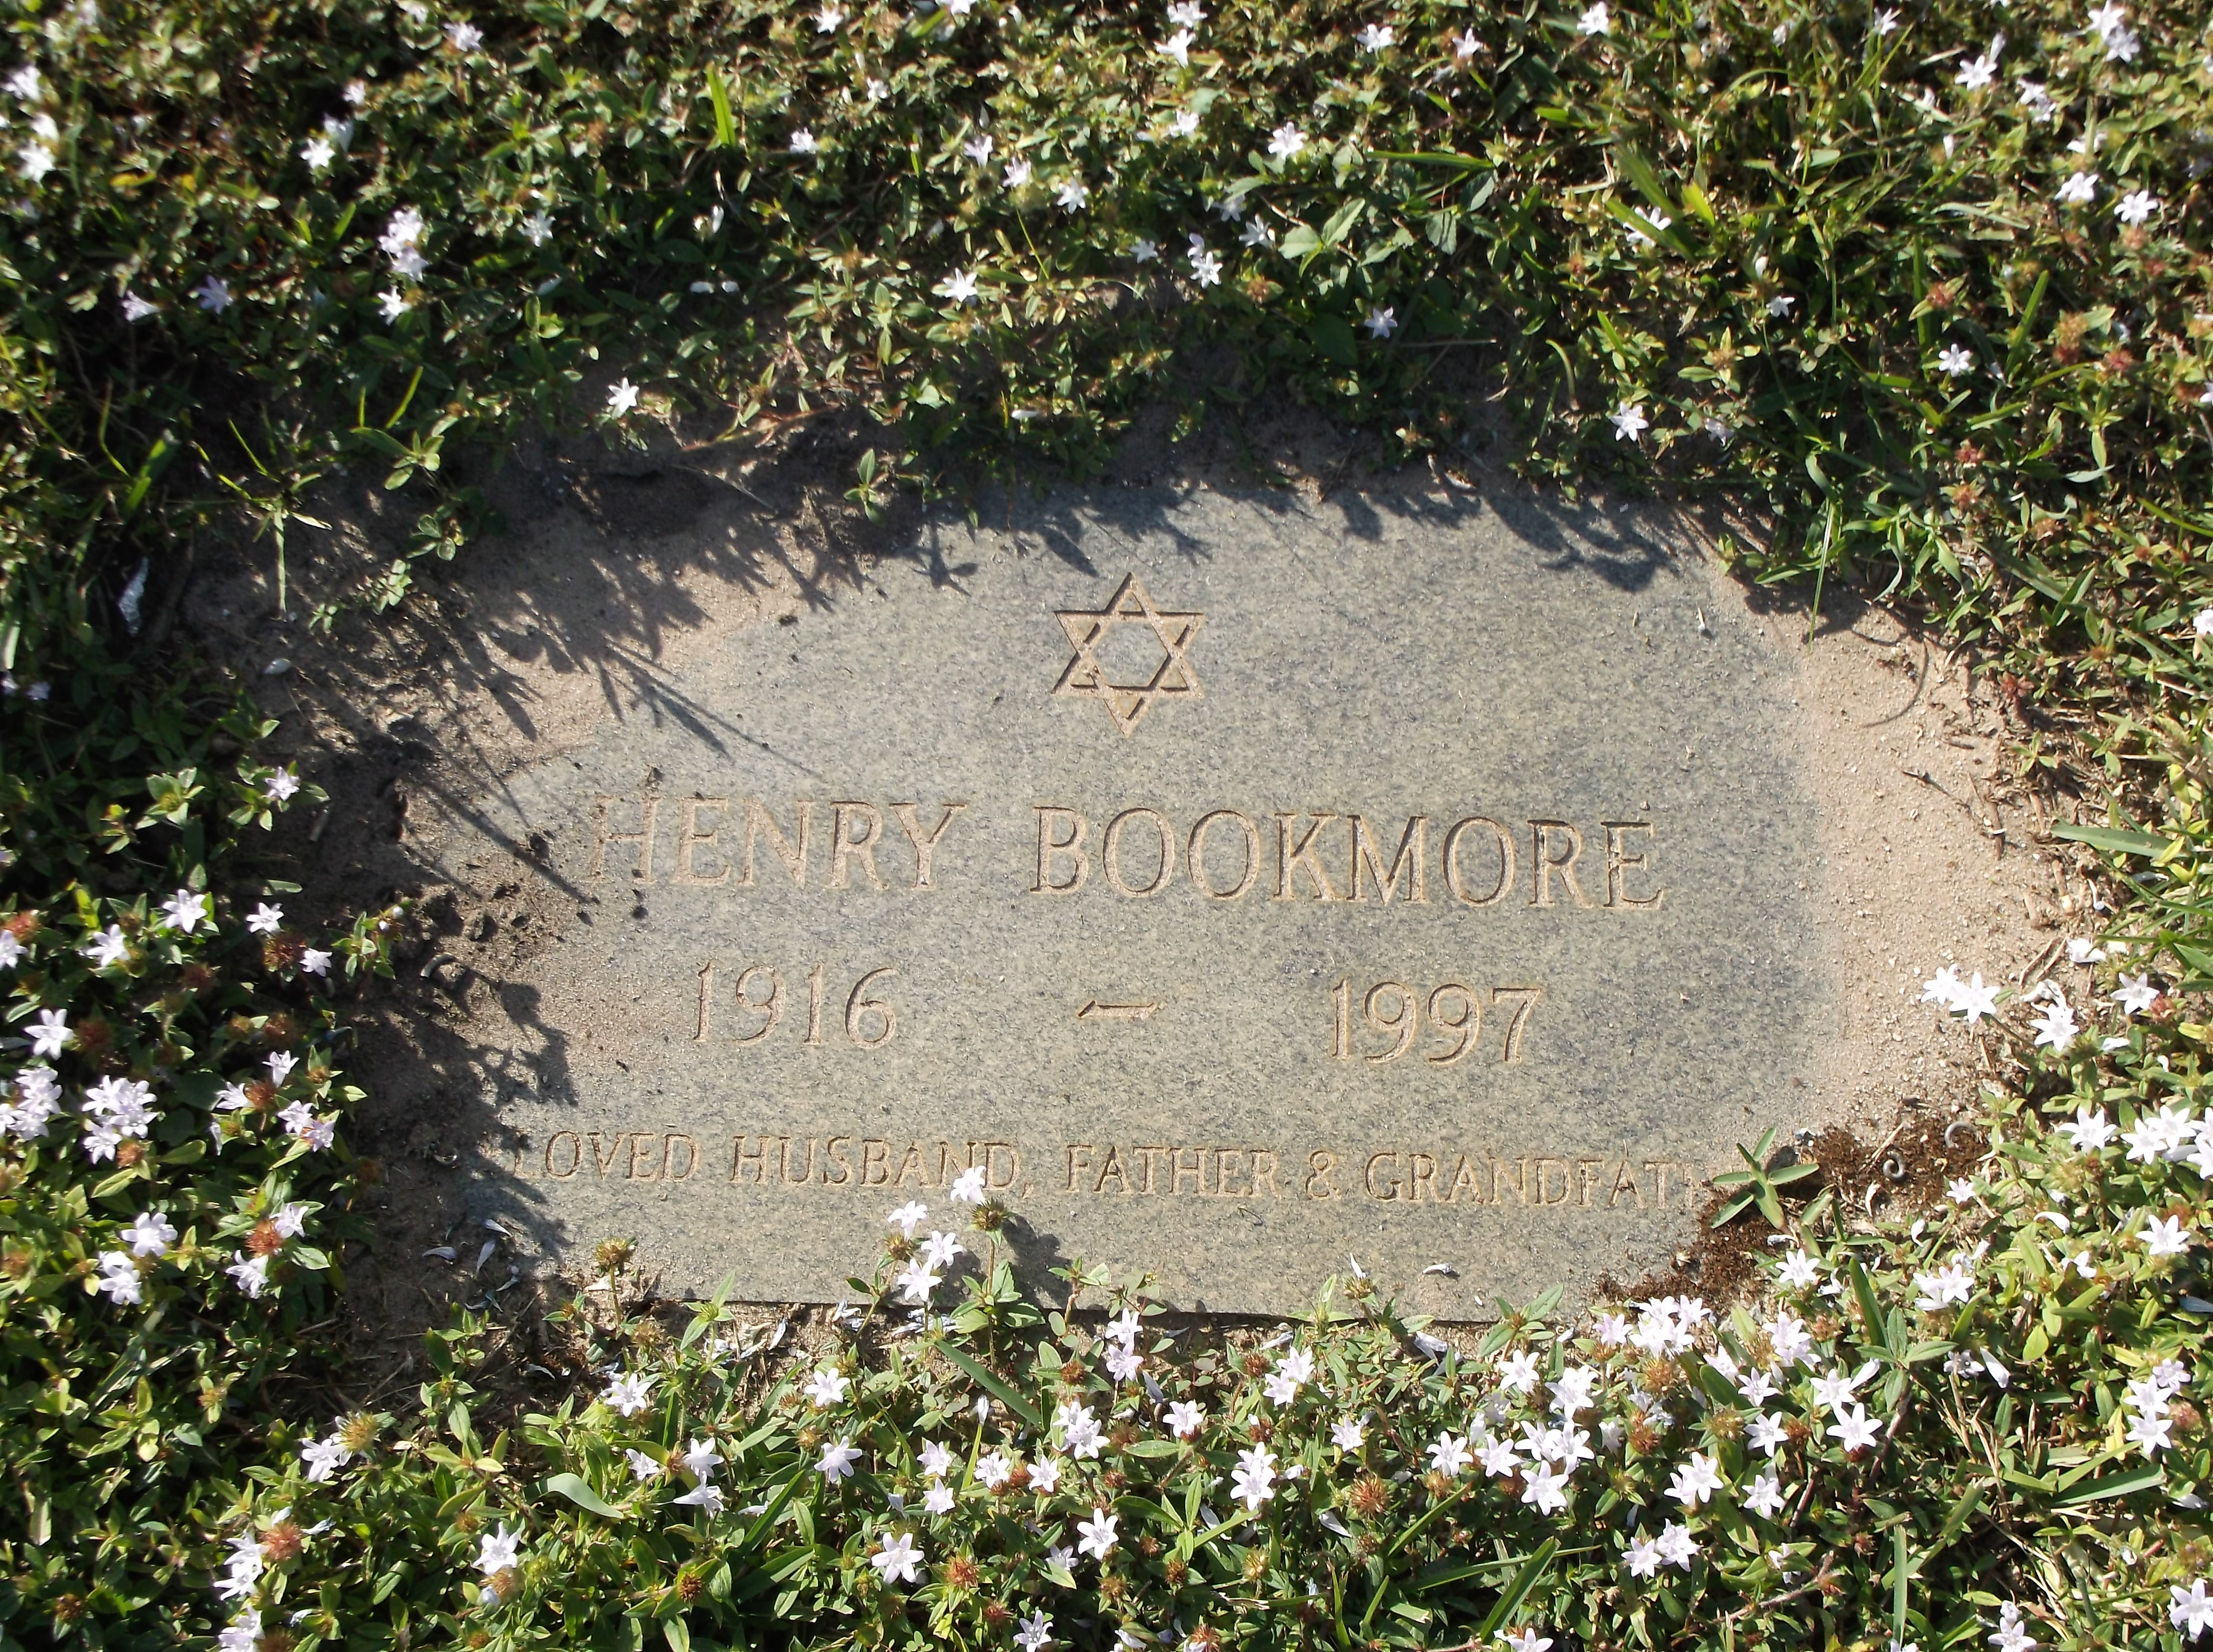 Henry Bookmore